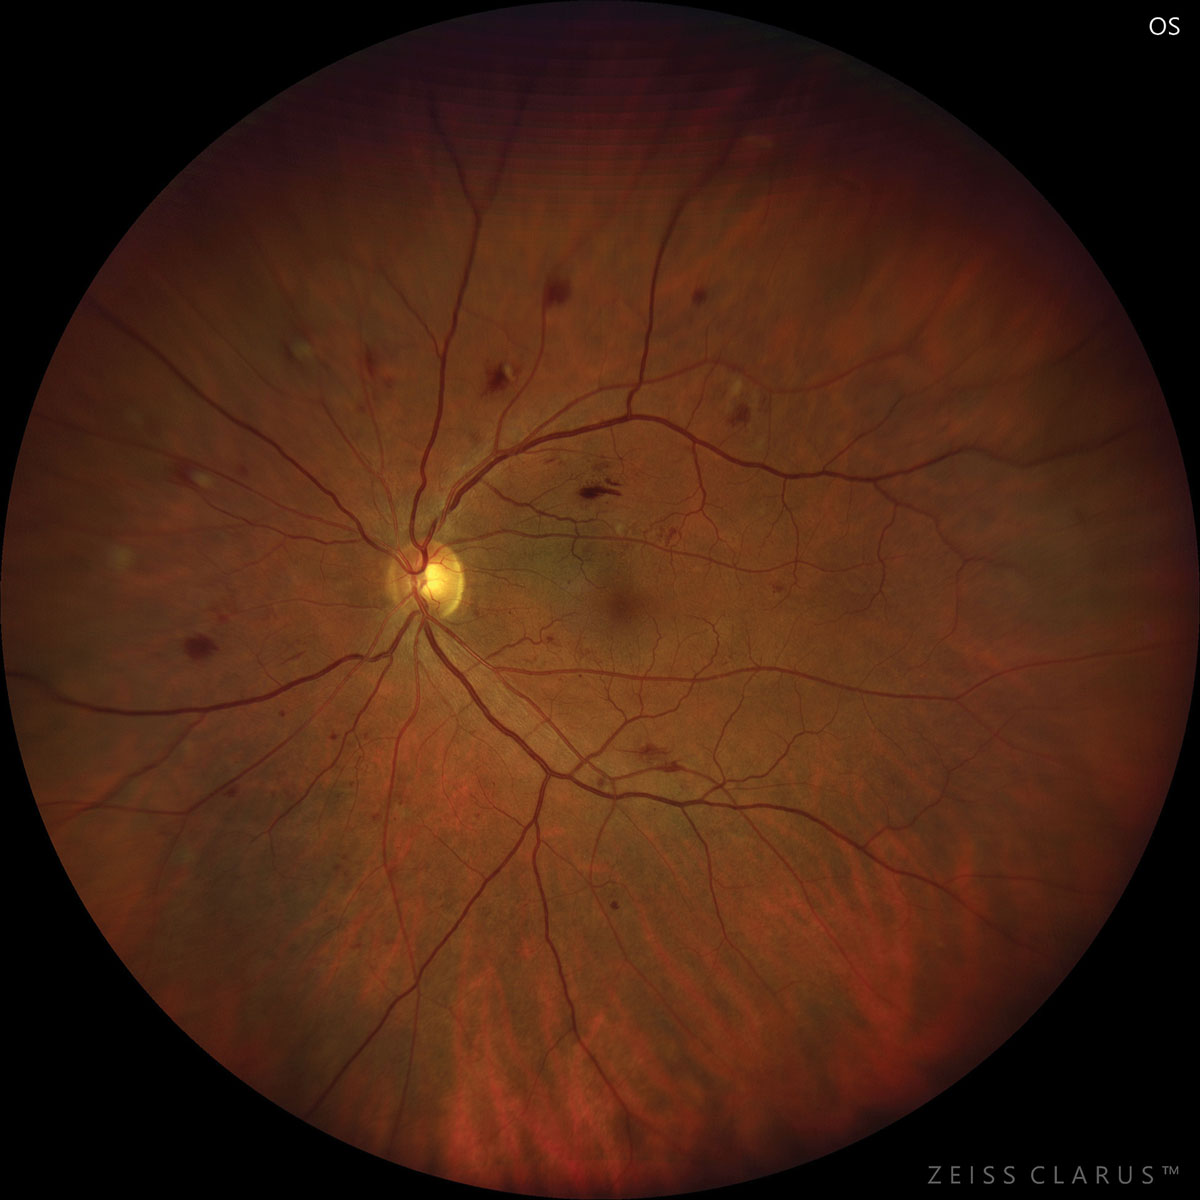 Diabetic retinopathy developed in about 14% of diabetes patients followed for 6.5 years, regardless of whether or not aspirin use was a part of the patient’s daily regimen.